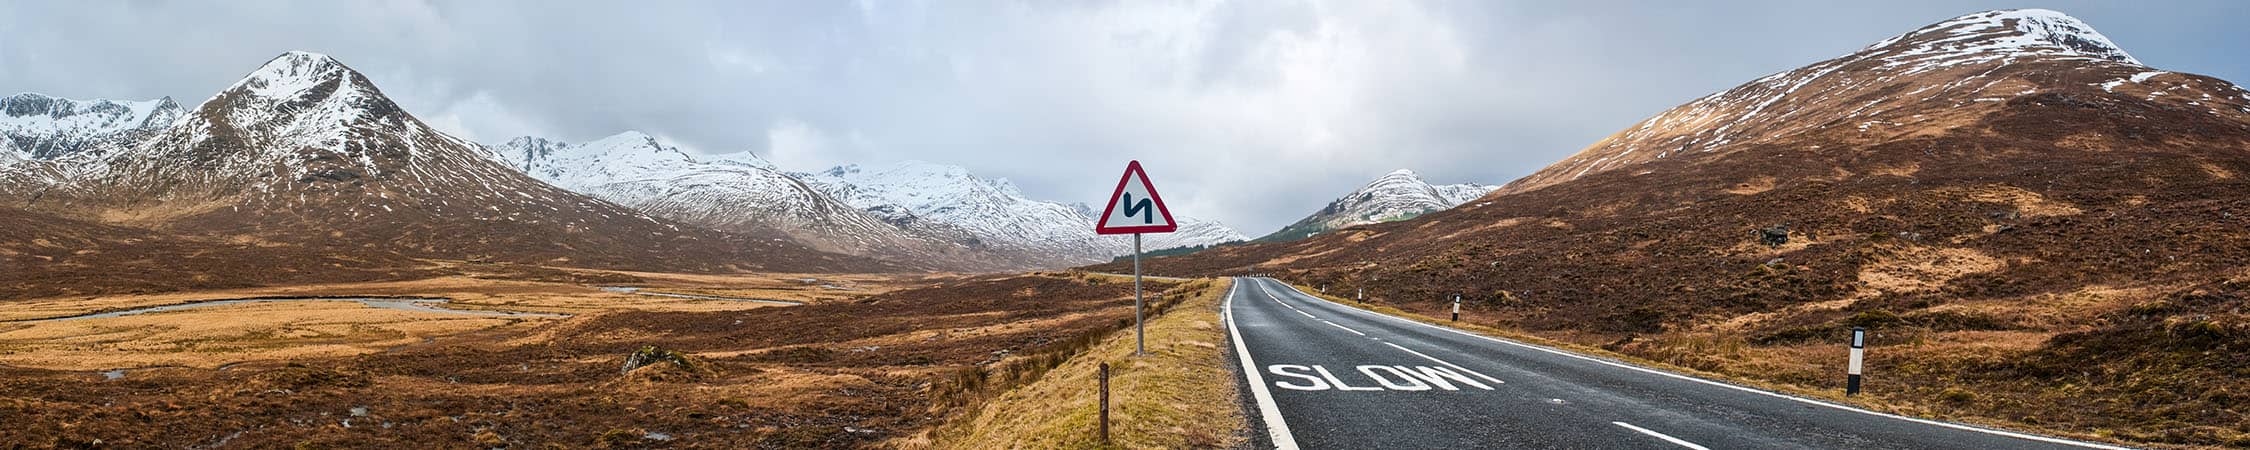 Travel through the snow caped mountains of Glencoe in the Scottish Highlands this Winter.